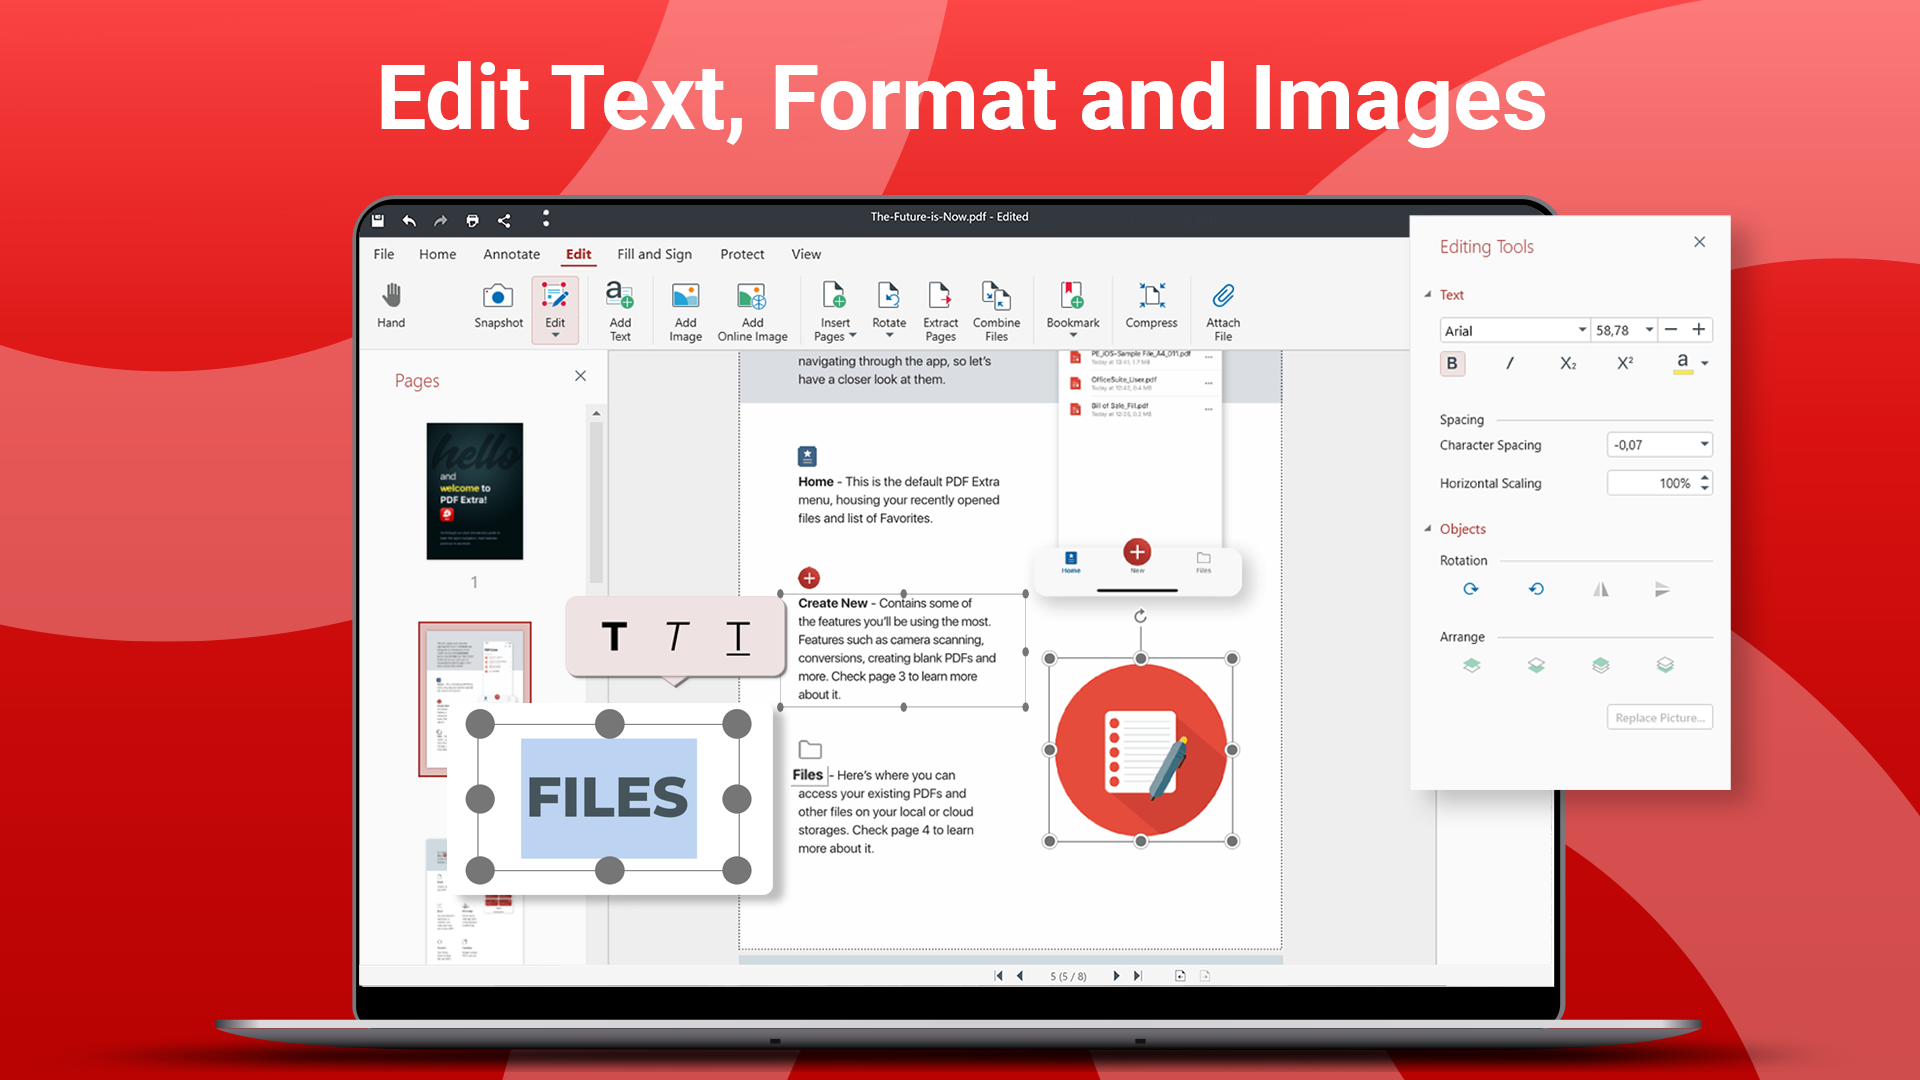 Edit Text, Format and Images